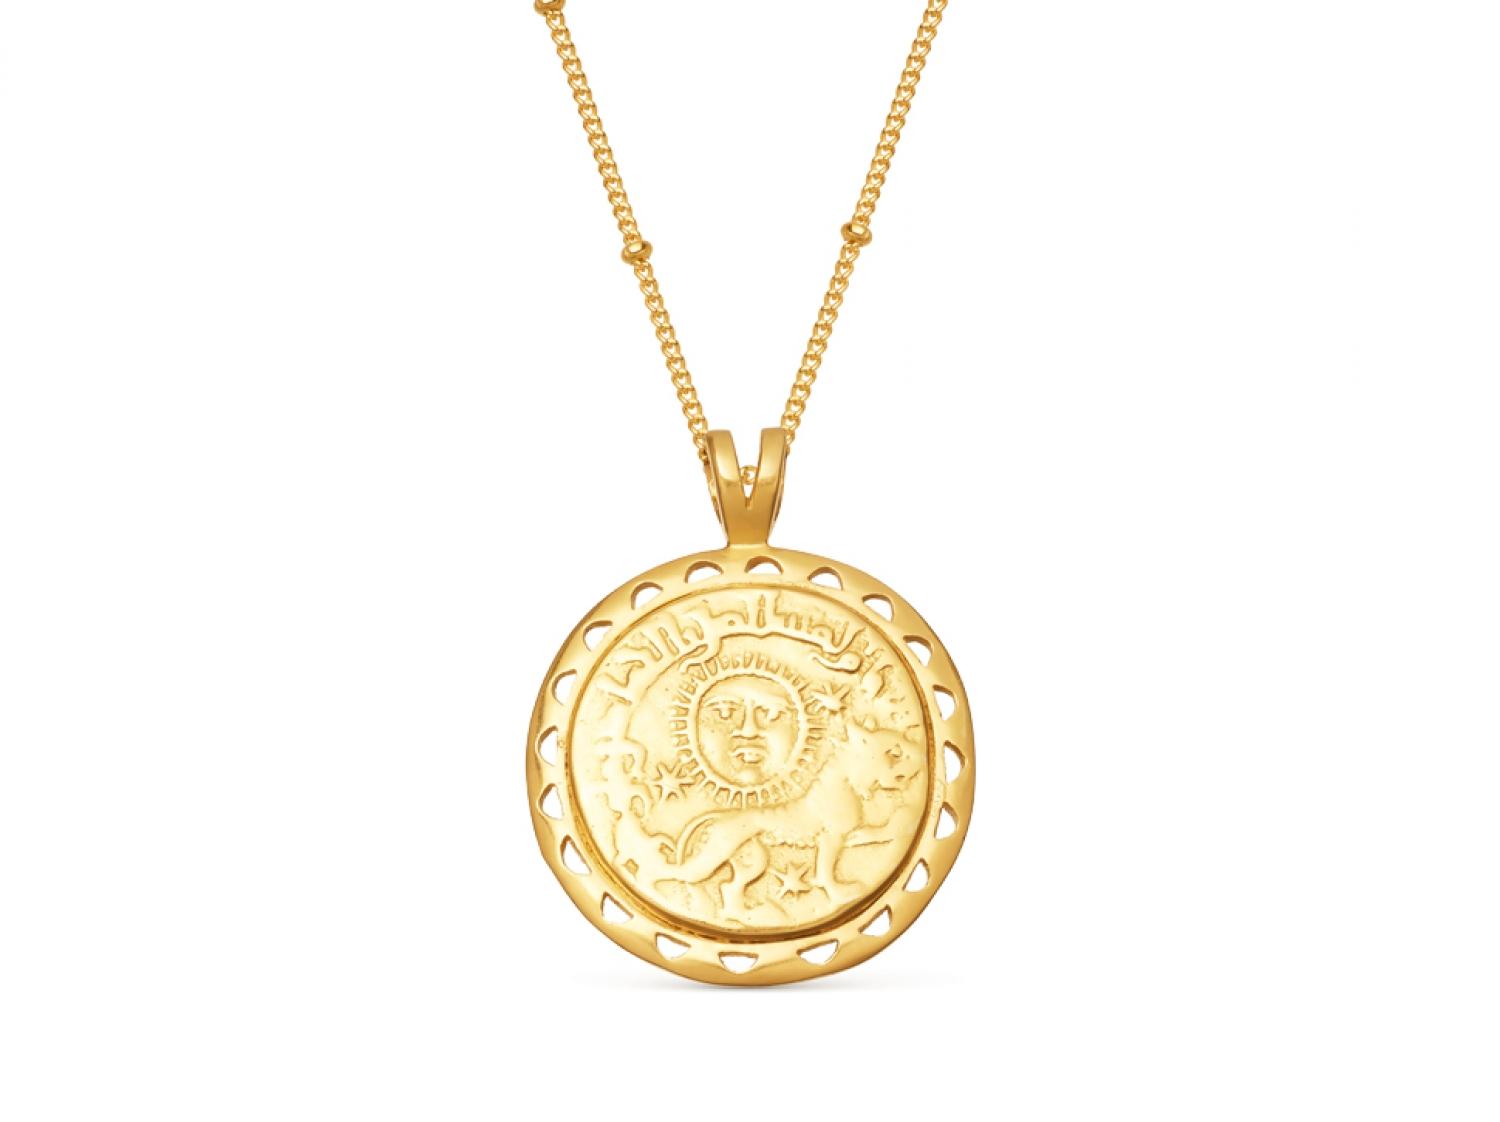 Missoma Lucy Williams X Rising Sun Medallion Necklace in Metallic - Lyst